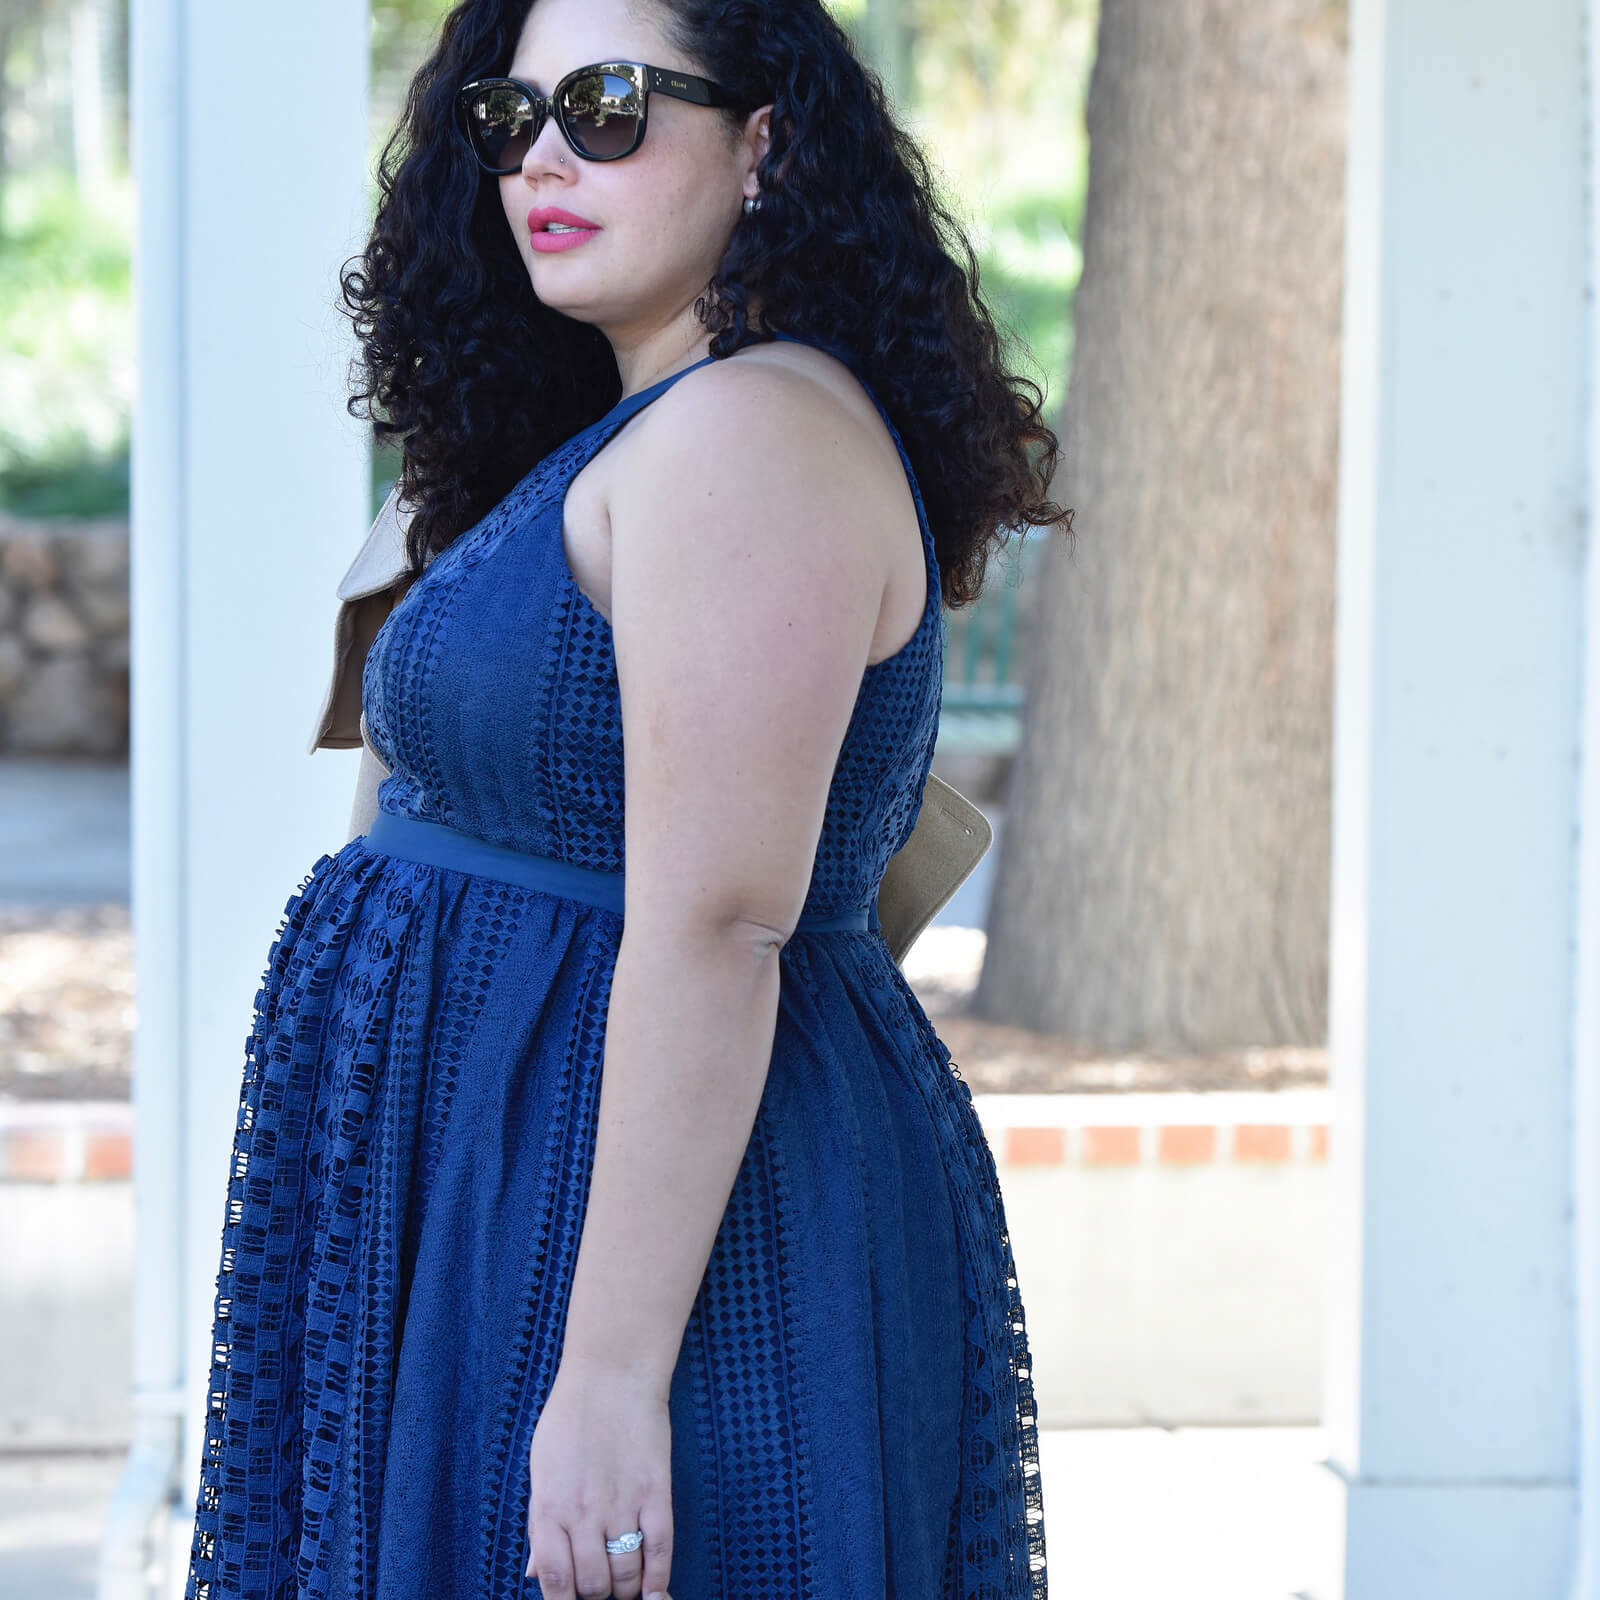 Nothing Says Romance Like a Lace Dress | Girl With Curves